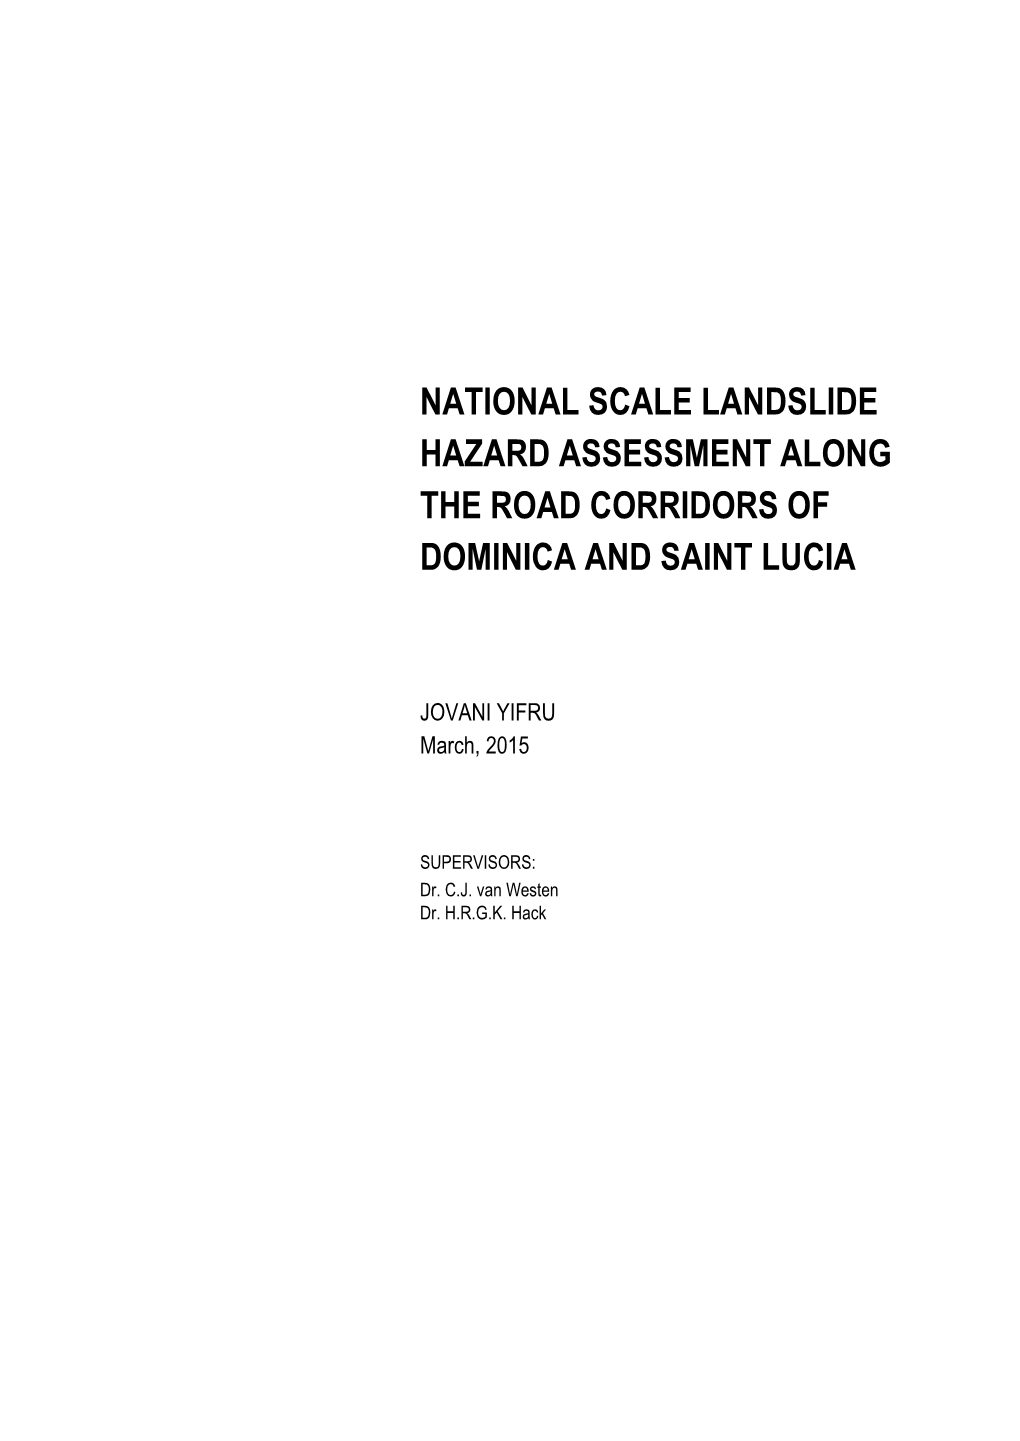 National Scale Landslide Hazard Assessment Along the Road Corridors of Dominica and Saint Lucia